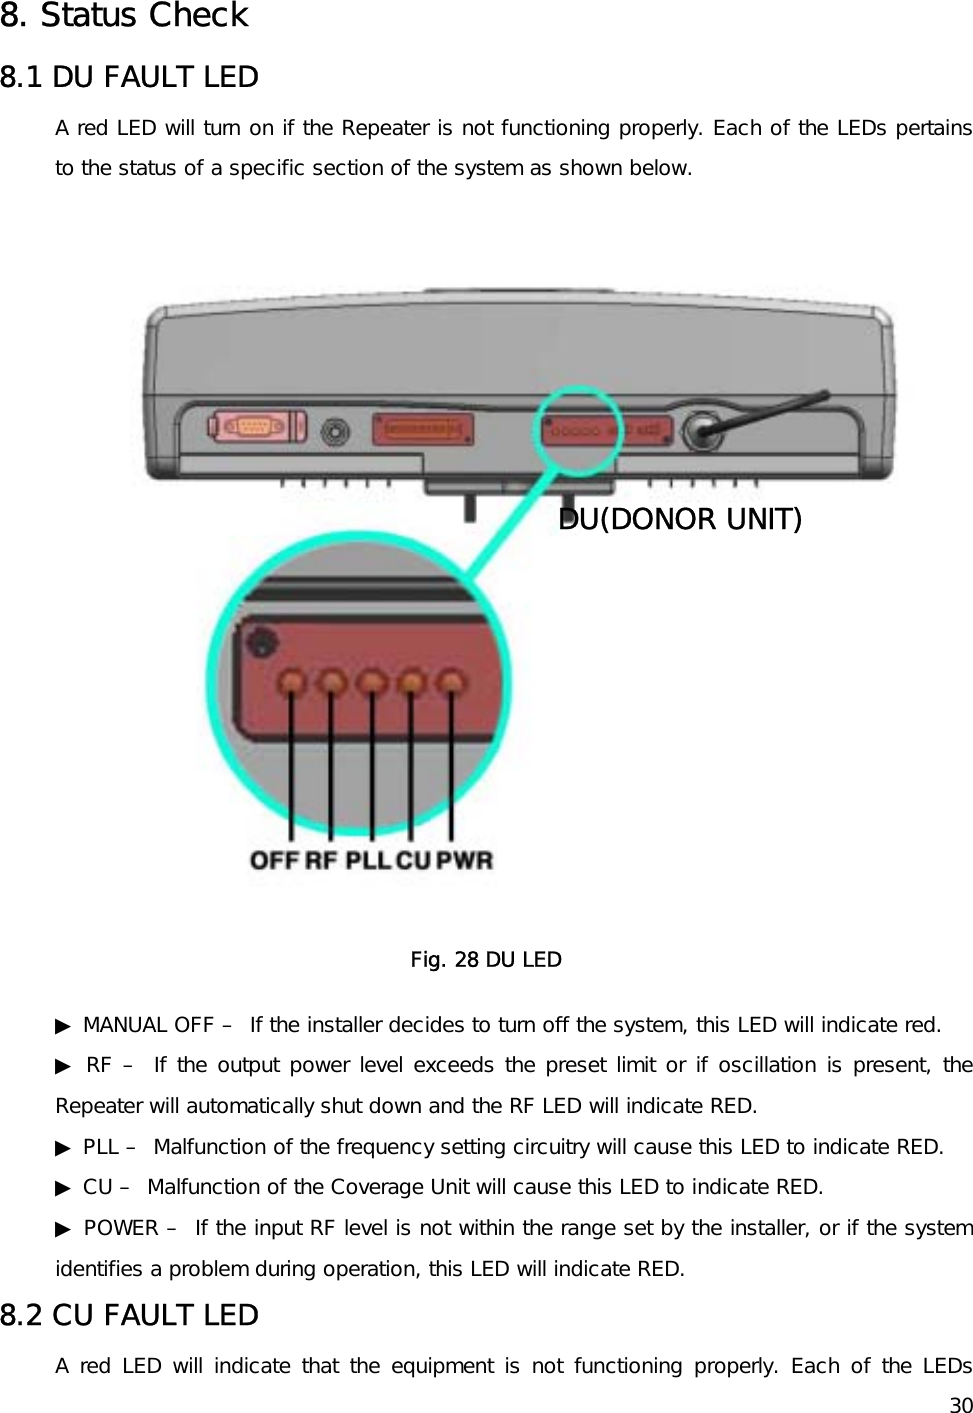    30 8. Status Check 8.1 DU FAULT LED A red LED will turn on if the Repeater is not functioning properly. Each of the LEDs pertains to the status of a specific section of the system as shown below.   Fig. 28 DU LED  ▶ MANUAL OFF –  If the installer decides to turn off the system, this LED will indicate red. ▶ RF –  If the output power level exceeds the preset limit or if oscillation is present, the Repeater will automatically shut down and the RF LED will indicate RED. ▶ PLL –  Malfunction of the frequency setting circuitry will cause this LED to indicate RED. ▶ CU –  Malfunction of the Coverage Unit will cause this LED to indicate RED. ▶ POWER –  If the input RF level is not within the range set by the installer, or if the system identifies a problem during operation, this LED will indicate RED. 8.2 CU FAULT LED A red LED will indicate that the equipment is not functioning properly. Each of the LEDs DU(DONOR UNIT) 